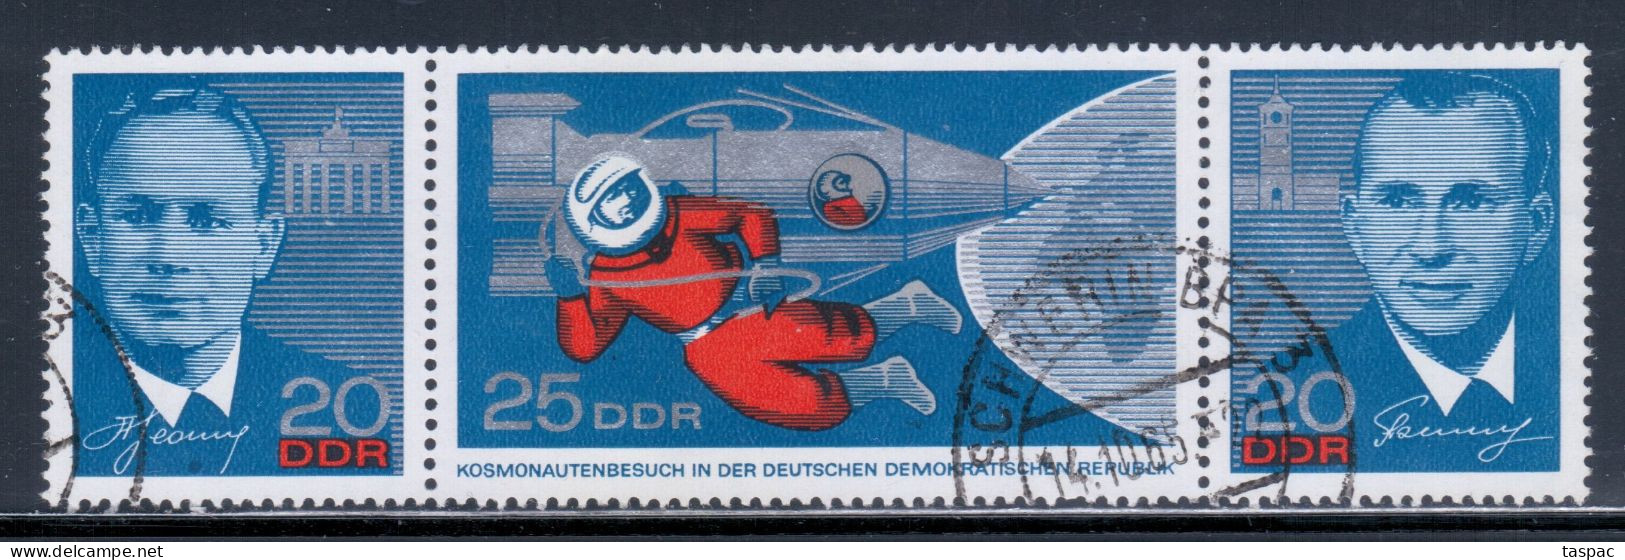 East Germany / DDR 1965 Mi# 1138-1140 Used - Strip Of 3 - Visit Of The Russian Cosmonauts / Space - Usati